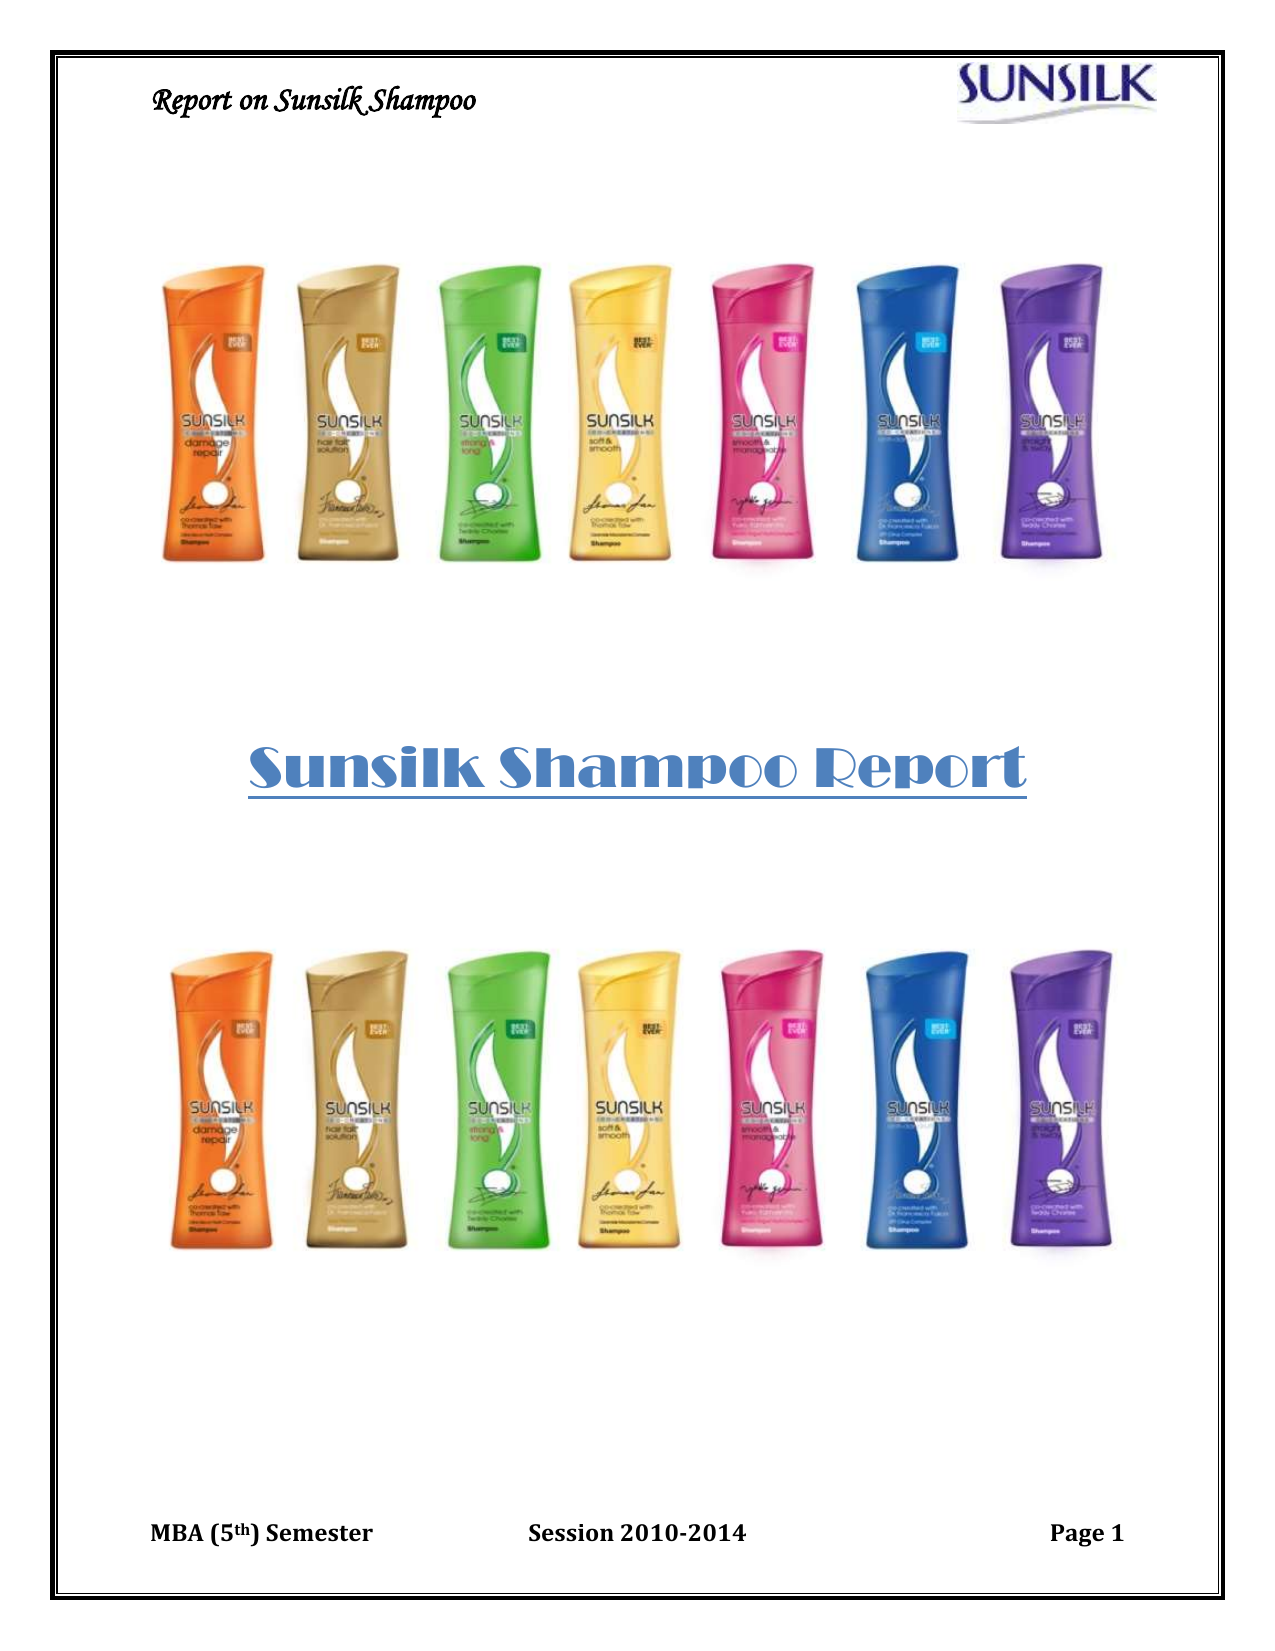 case study on product life cycle of sunsilk